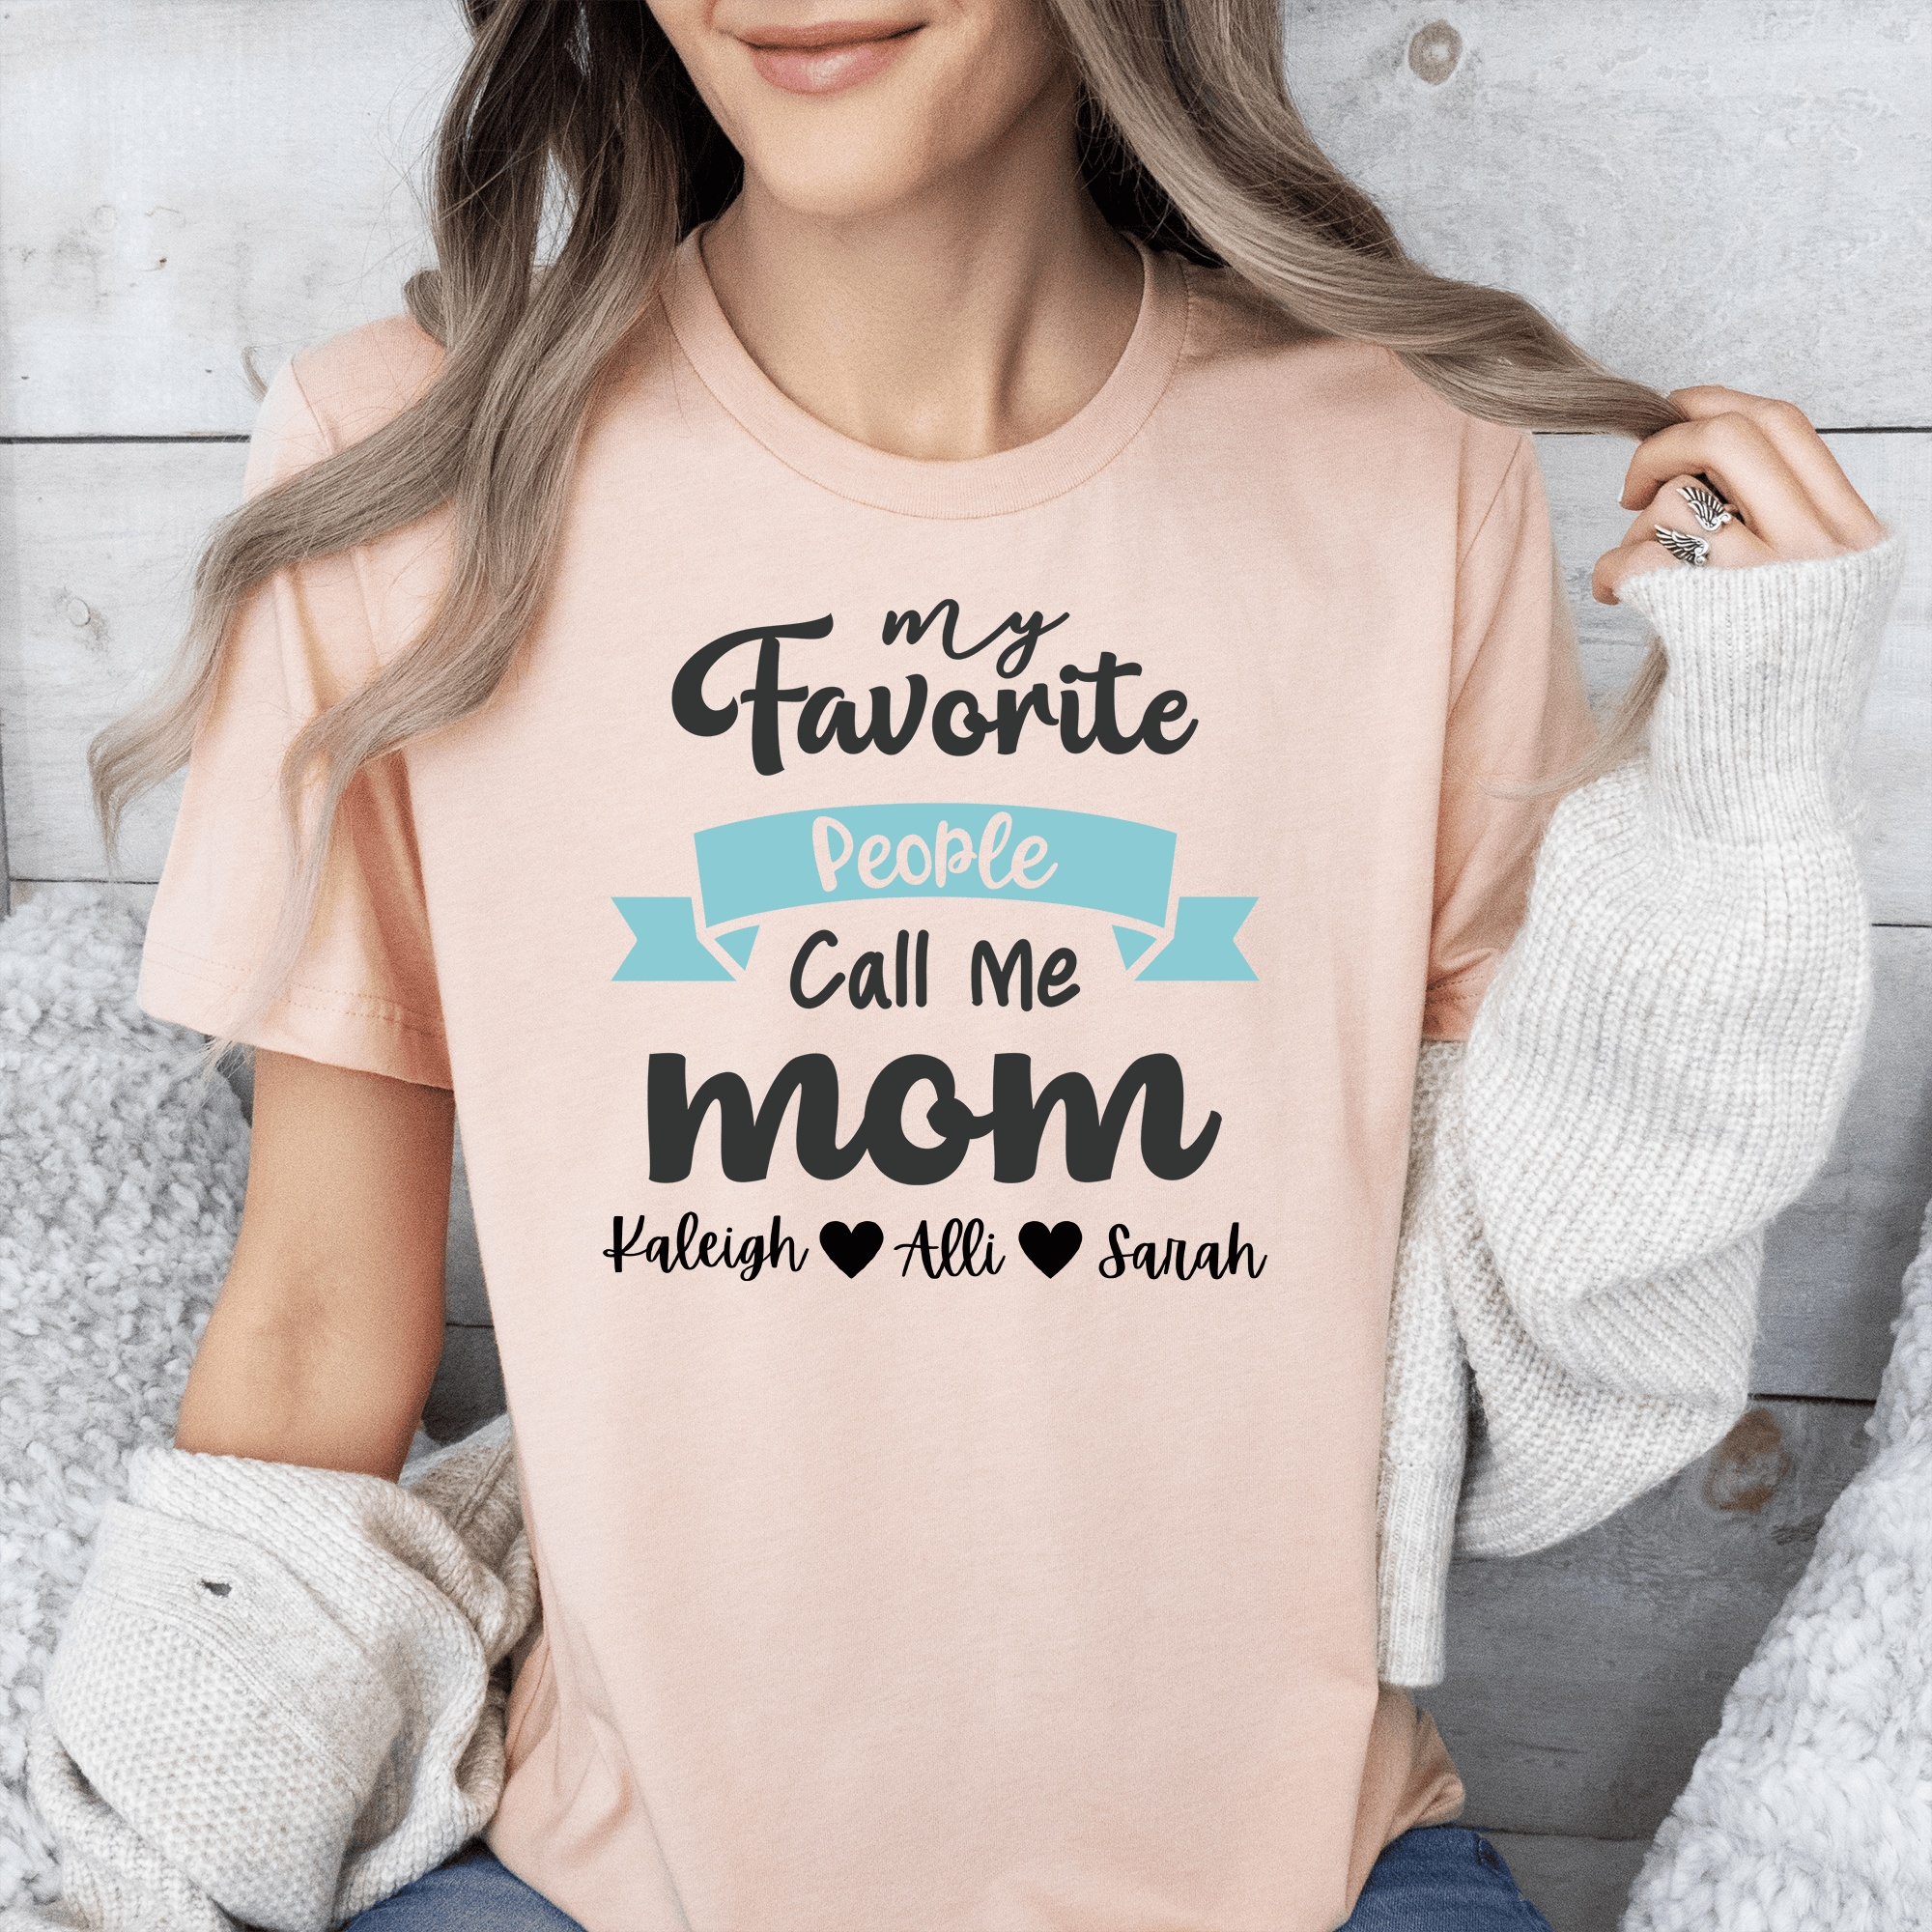 Womens Heather Peach T Shirt with Favorite-People-Call-Me-Mom design